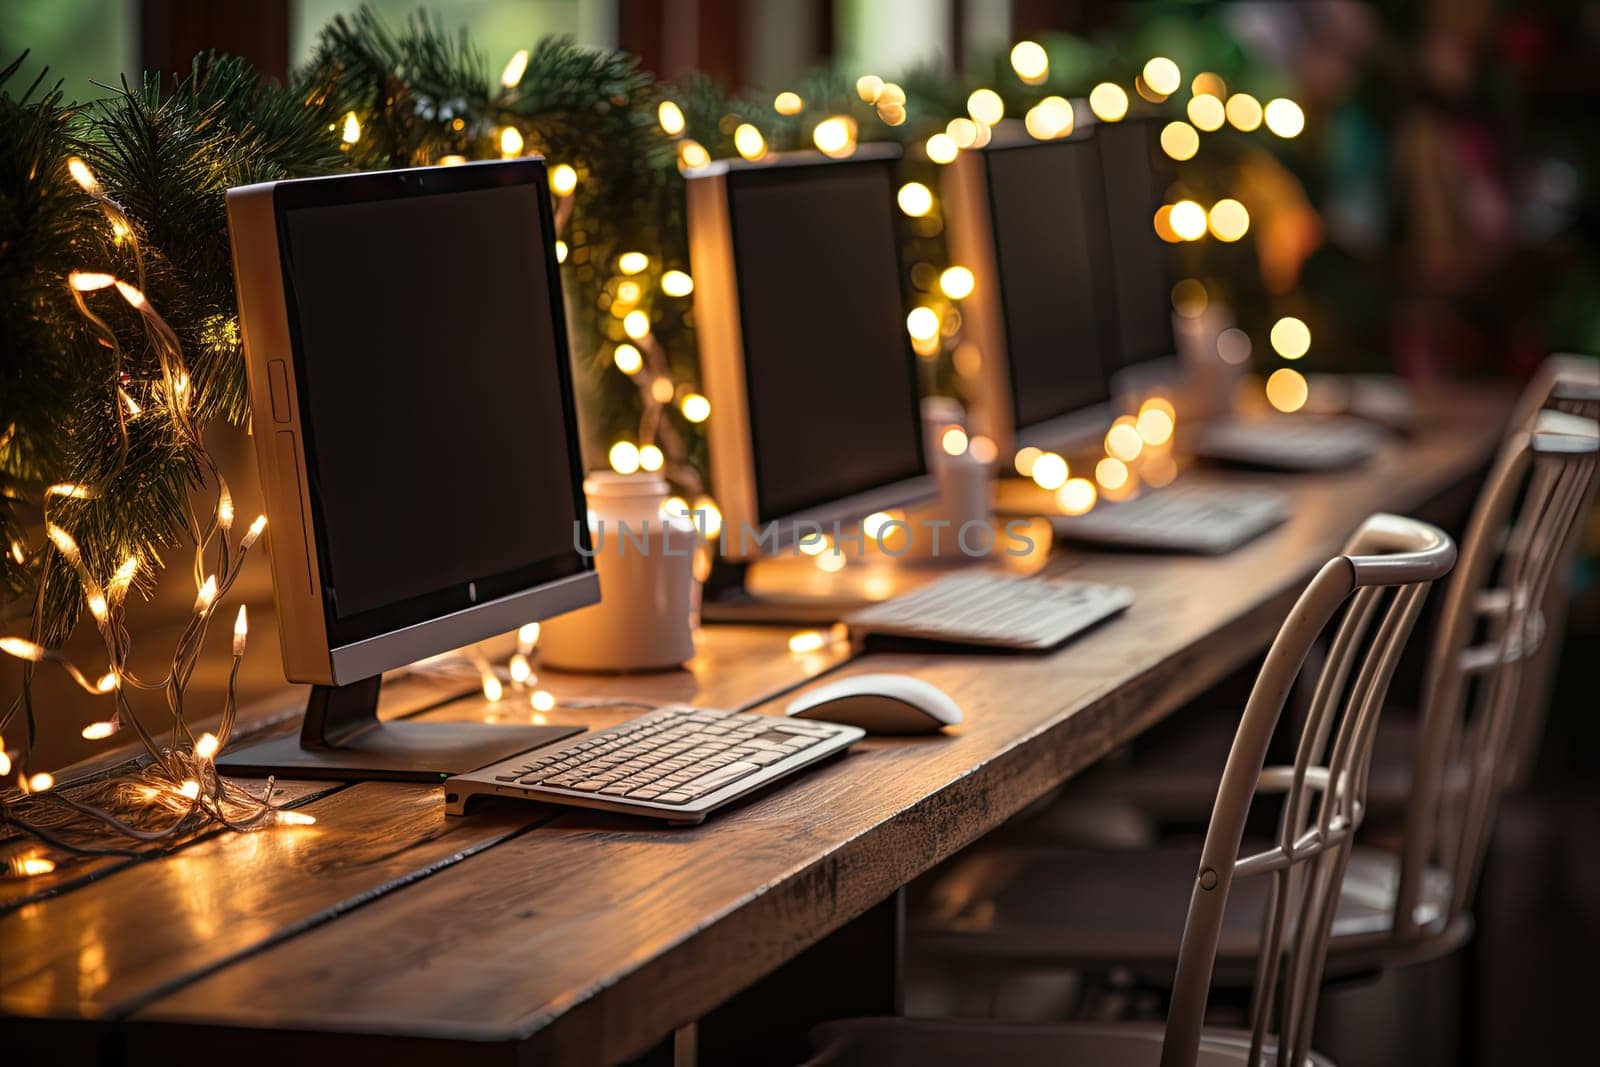 two computers on a desk with christmas lights in the background and an image of a laptop, keyboard and mouse